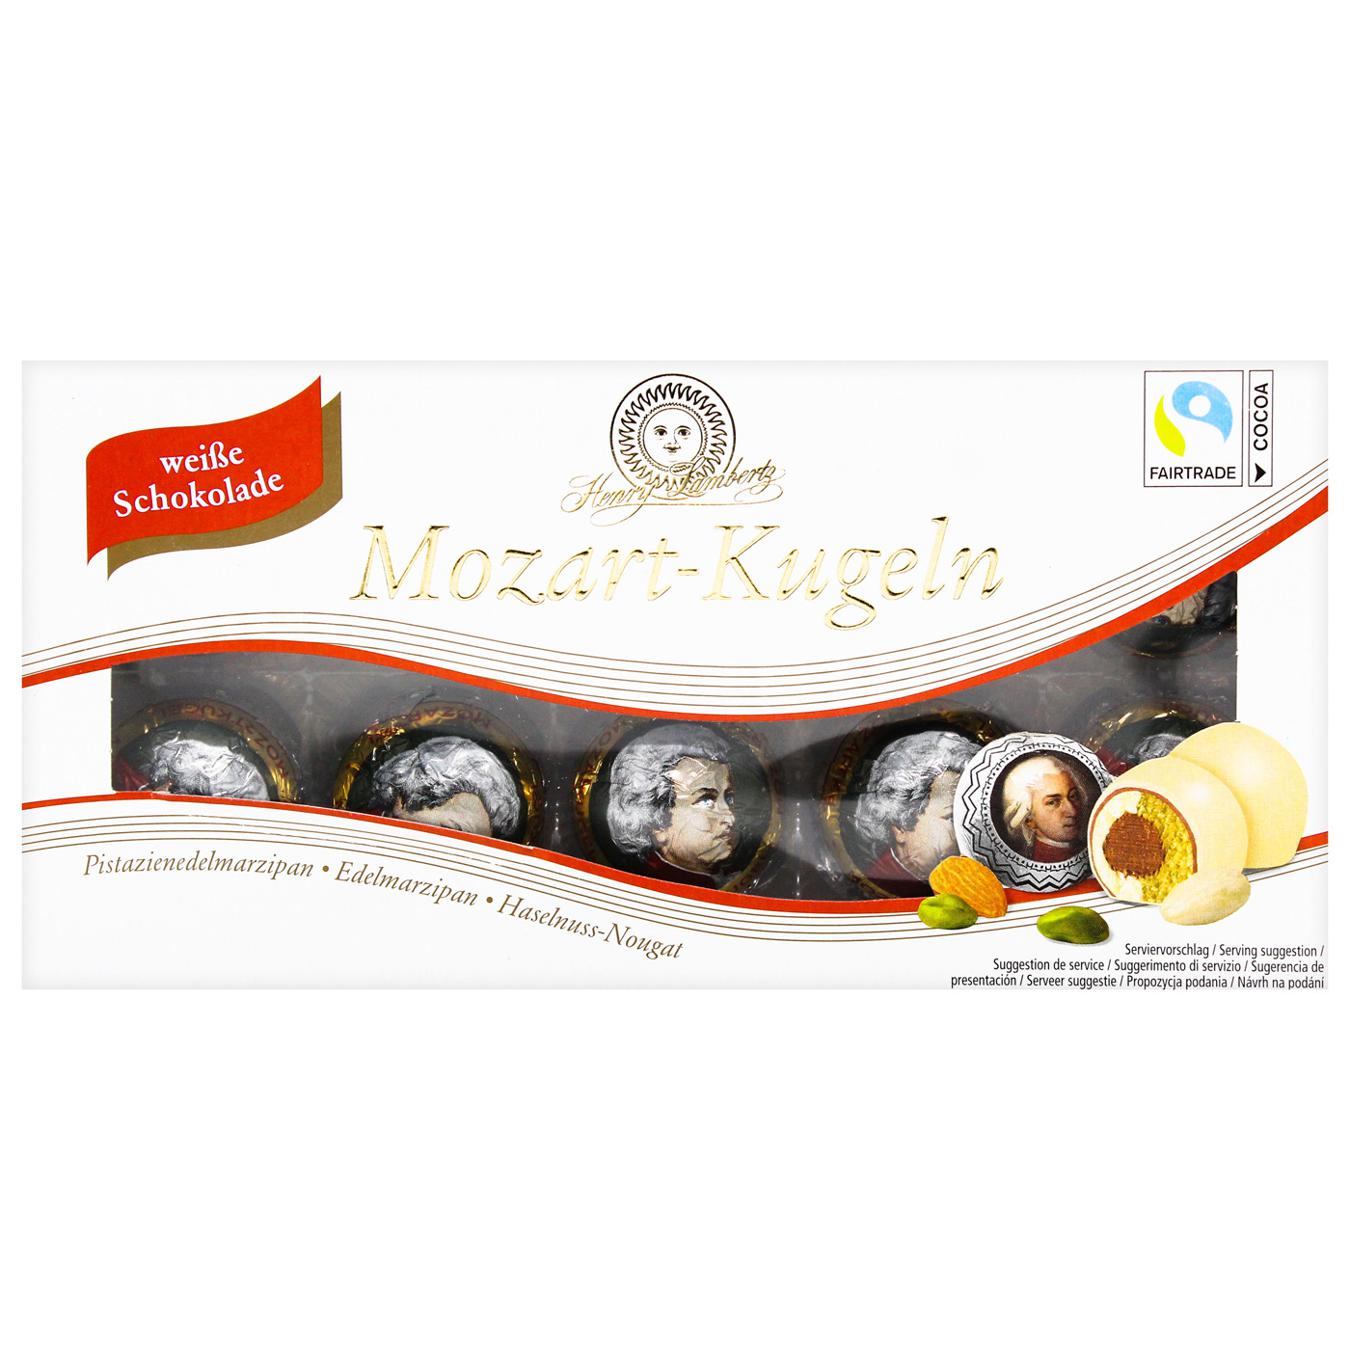 Lambertz candies with pistachio-marzipan filling (24%), marzipan filling (24%) and nougat (13%), covered with white chocolate (22%) and milk chocolate (17%)